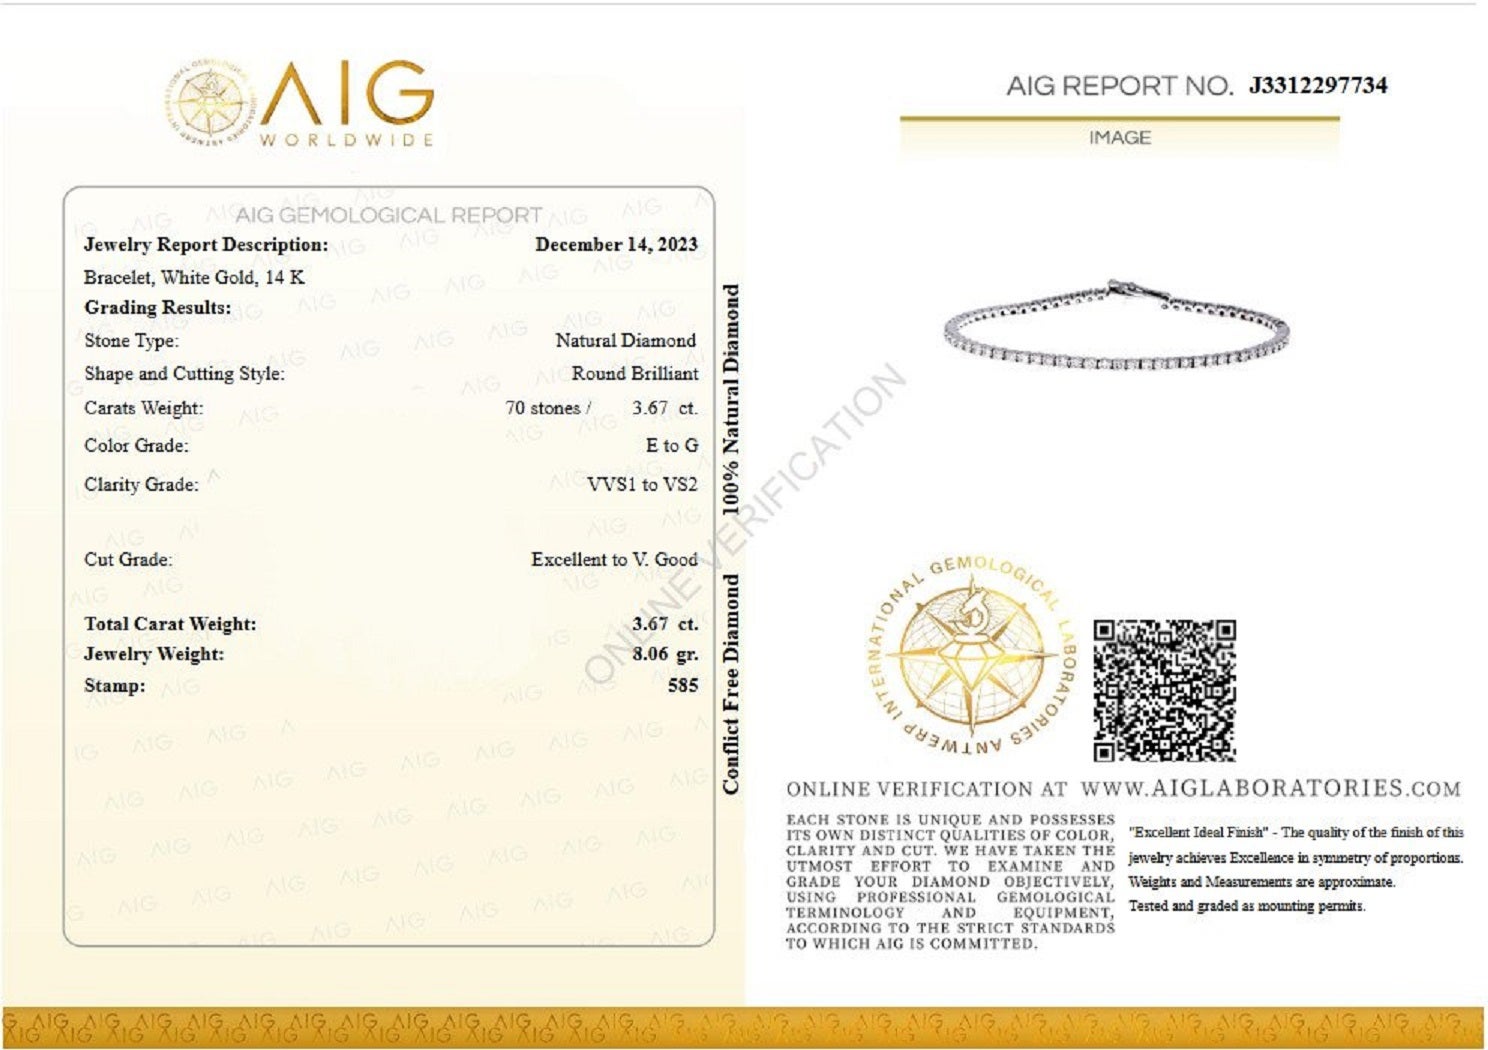 Side Stones:
___________
Natural Diamonds
Cut: Round Brilliant
Carat: 3.67 cttw / 70 stones
Color: E to G
Clarity: VVS1 to VS1

Item ships from Israeli Diamonds Exchange, customers are responsible for any local customs or VAT fees that might apply